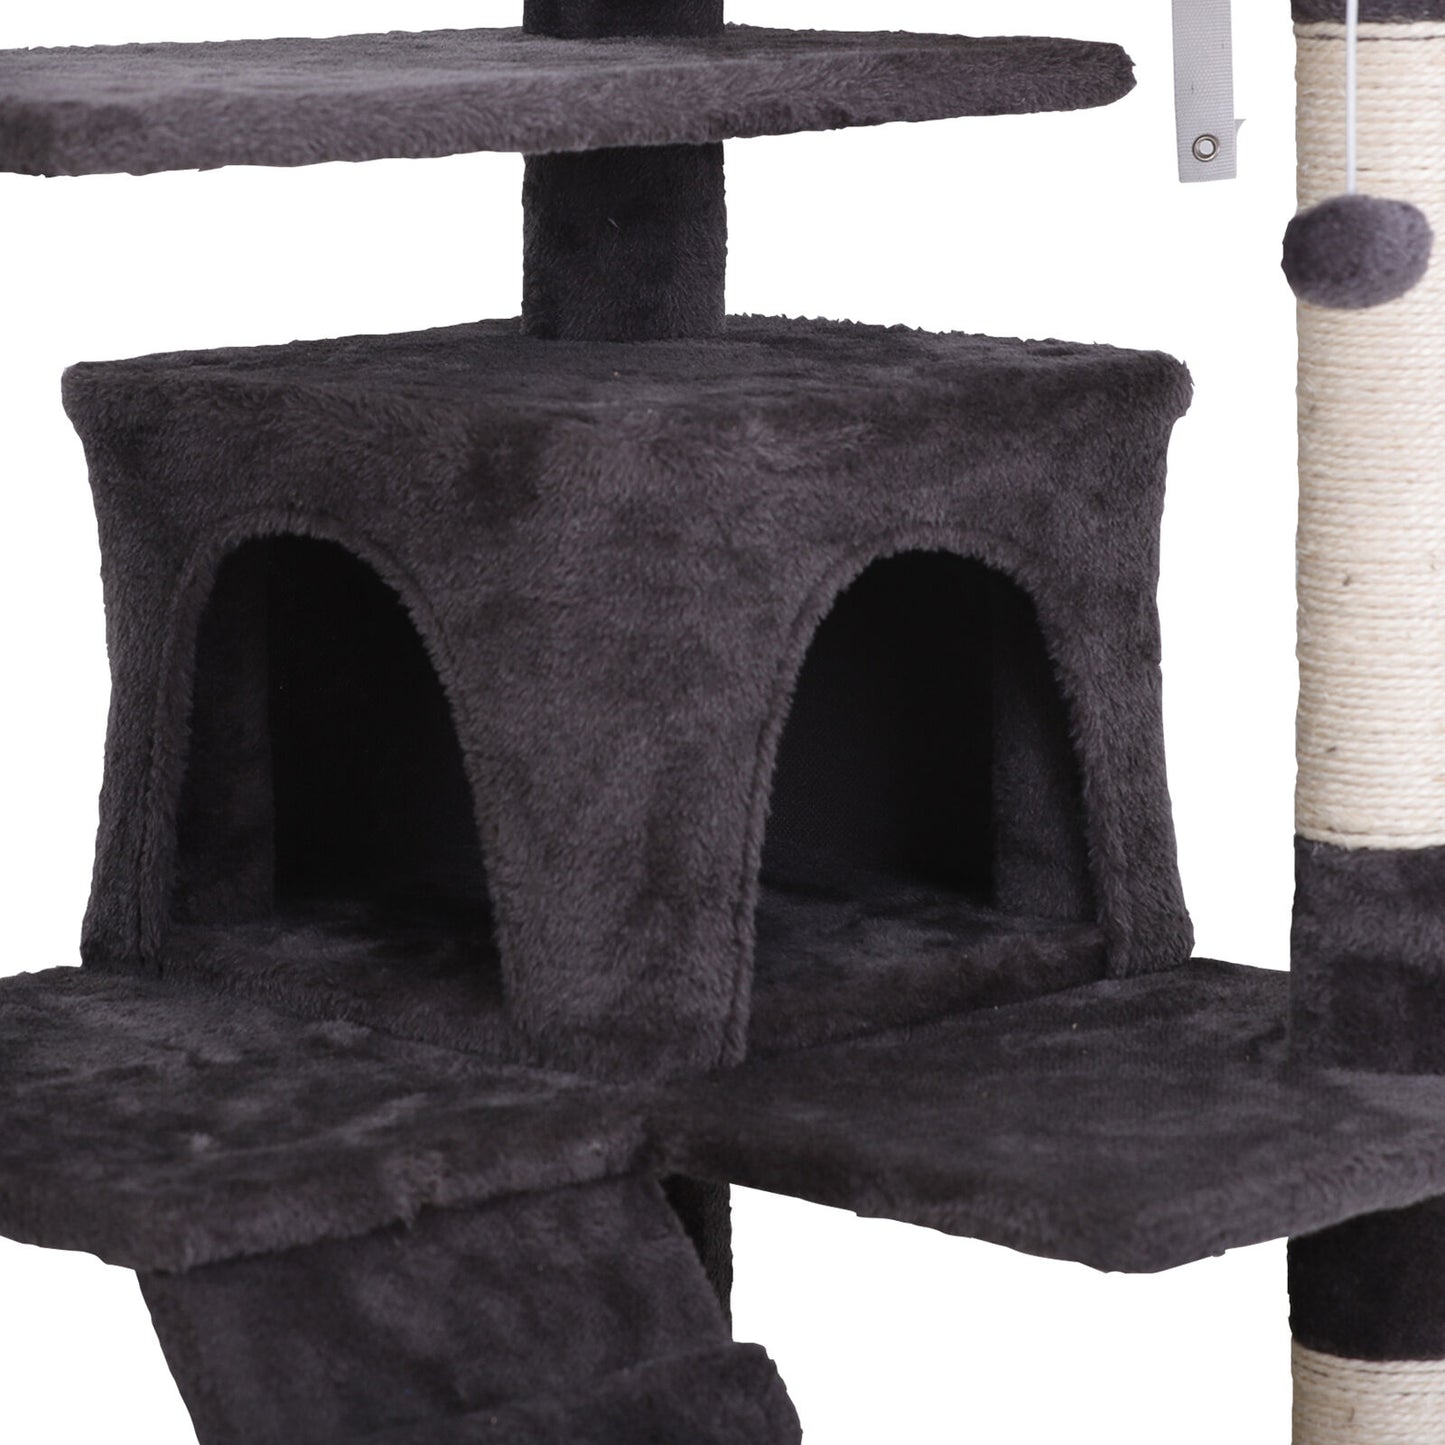 Durable 53" Cat Tree Activity Tower Pet  with Scratching Posts  Ladders Indoor